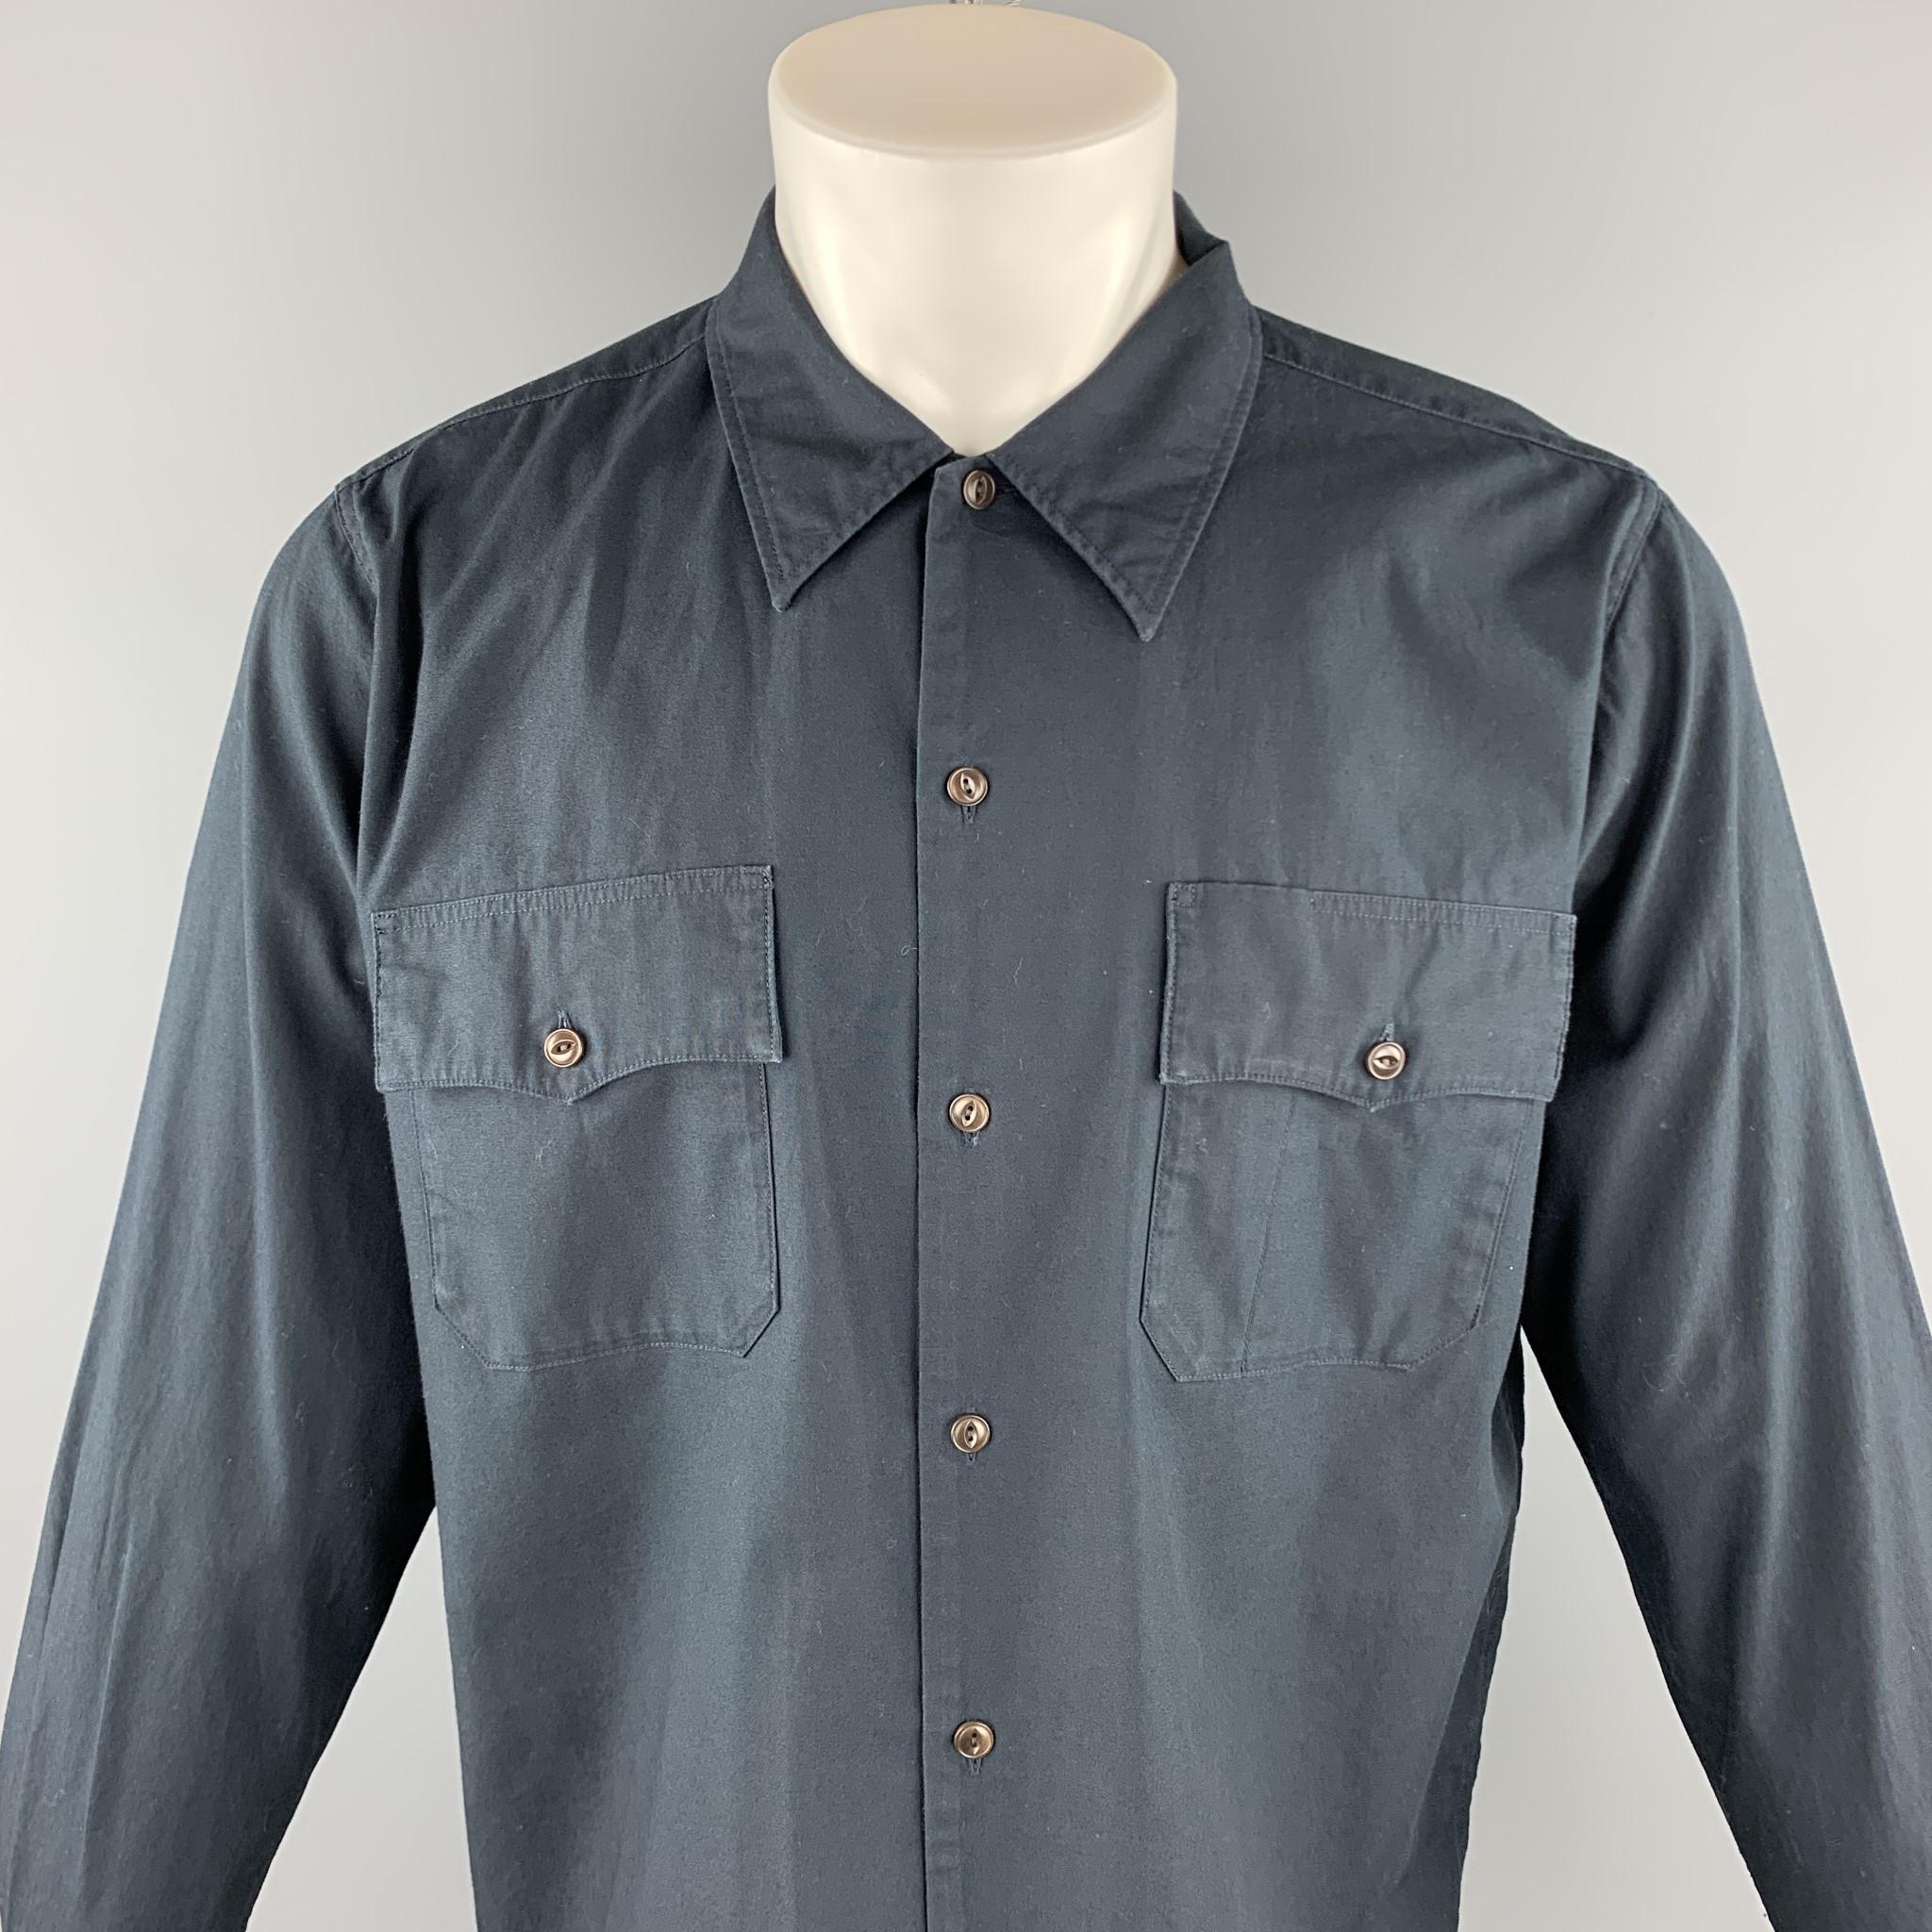 CHIMALA long sleeve shirt comes in a navy cotton featuring a button up style, patch pockets, and a spread collar. Made in Japan.

Excellent Pre-Owned Condition.
Marked: JP M

Measurements:

Shoulder: 17 in. 
Chest: 46 in. 
Sleeve: 25 in.
Length: 27